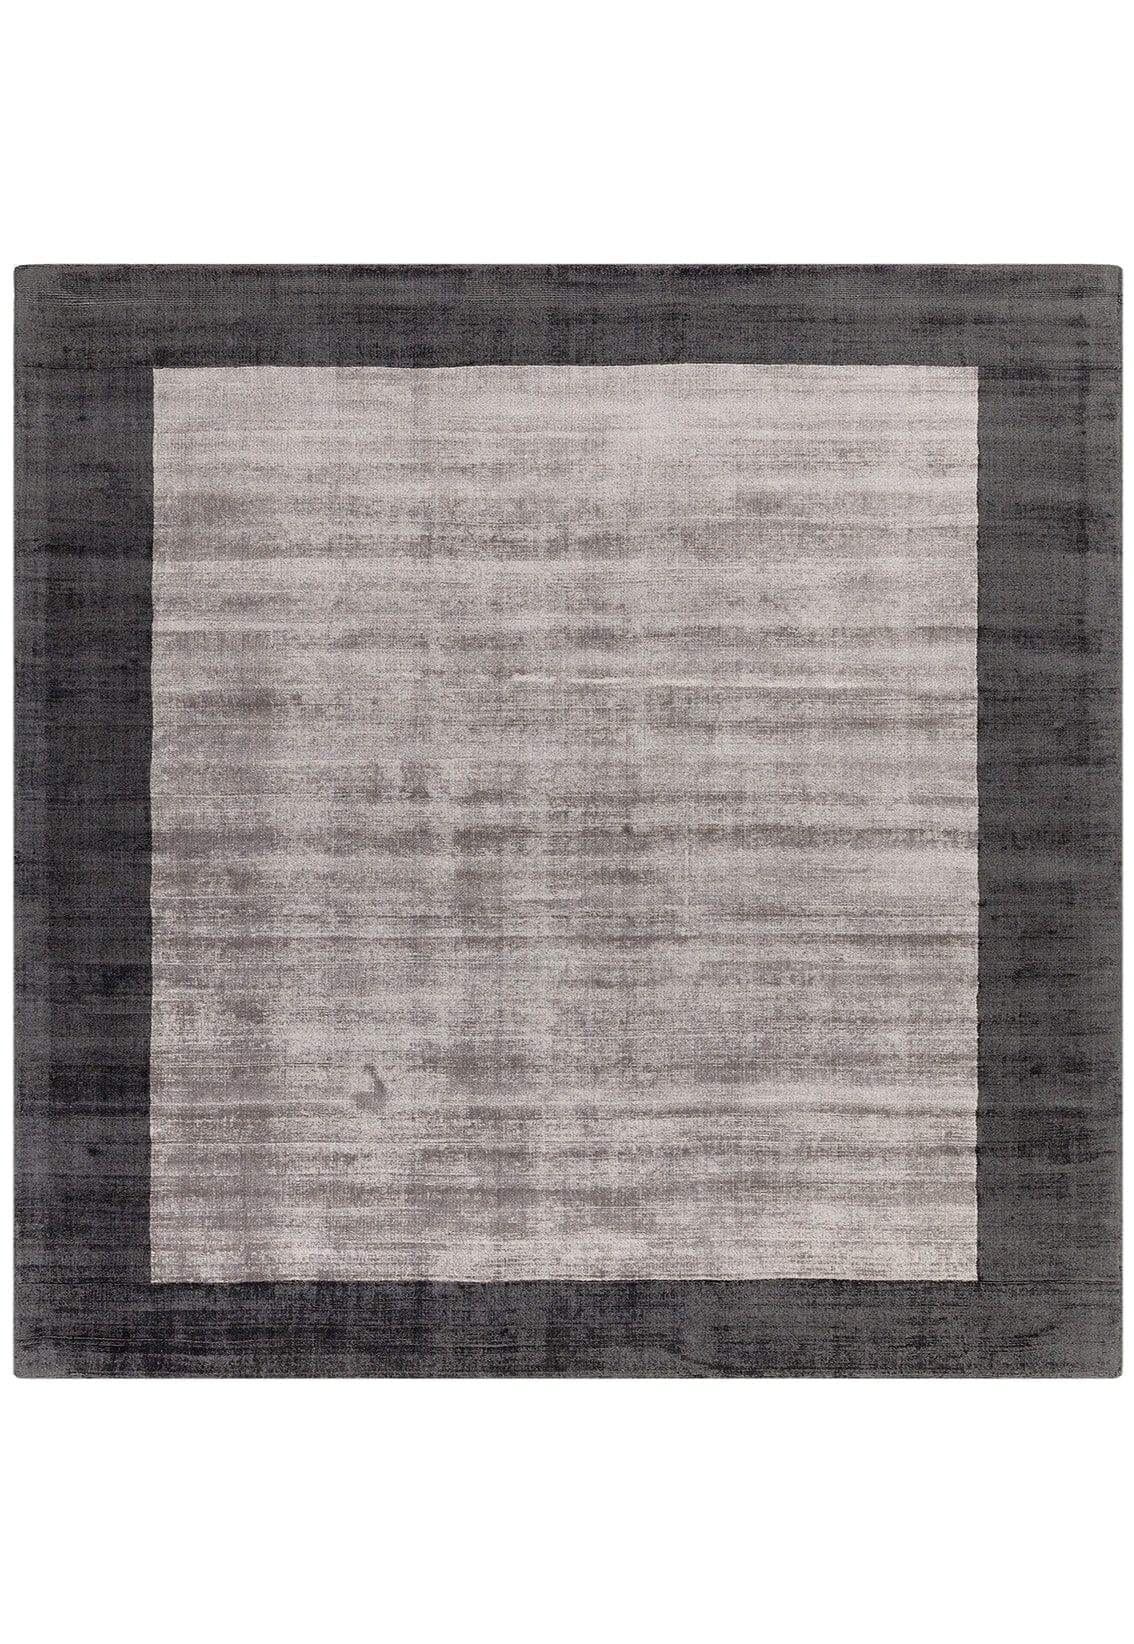  Asiatic Carpets-Asiatic Carpets Blade Hand Woven Rug Charcoal Silver - 200 x 200cm-Grey, Silver 717 